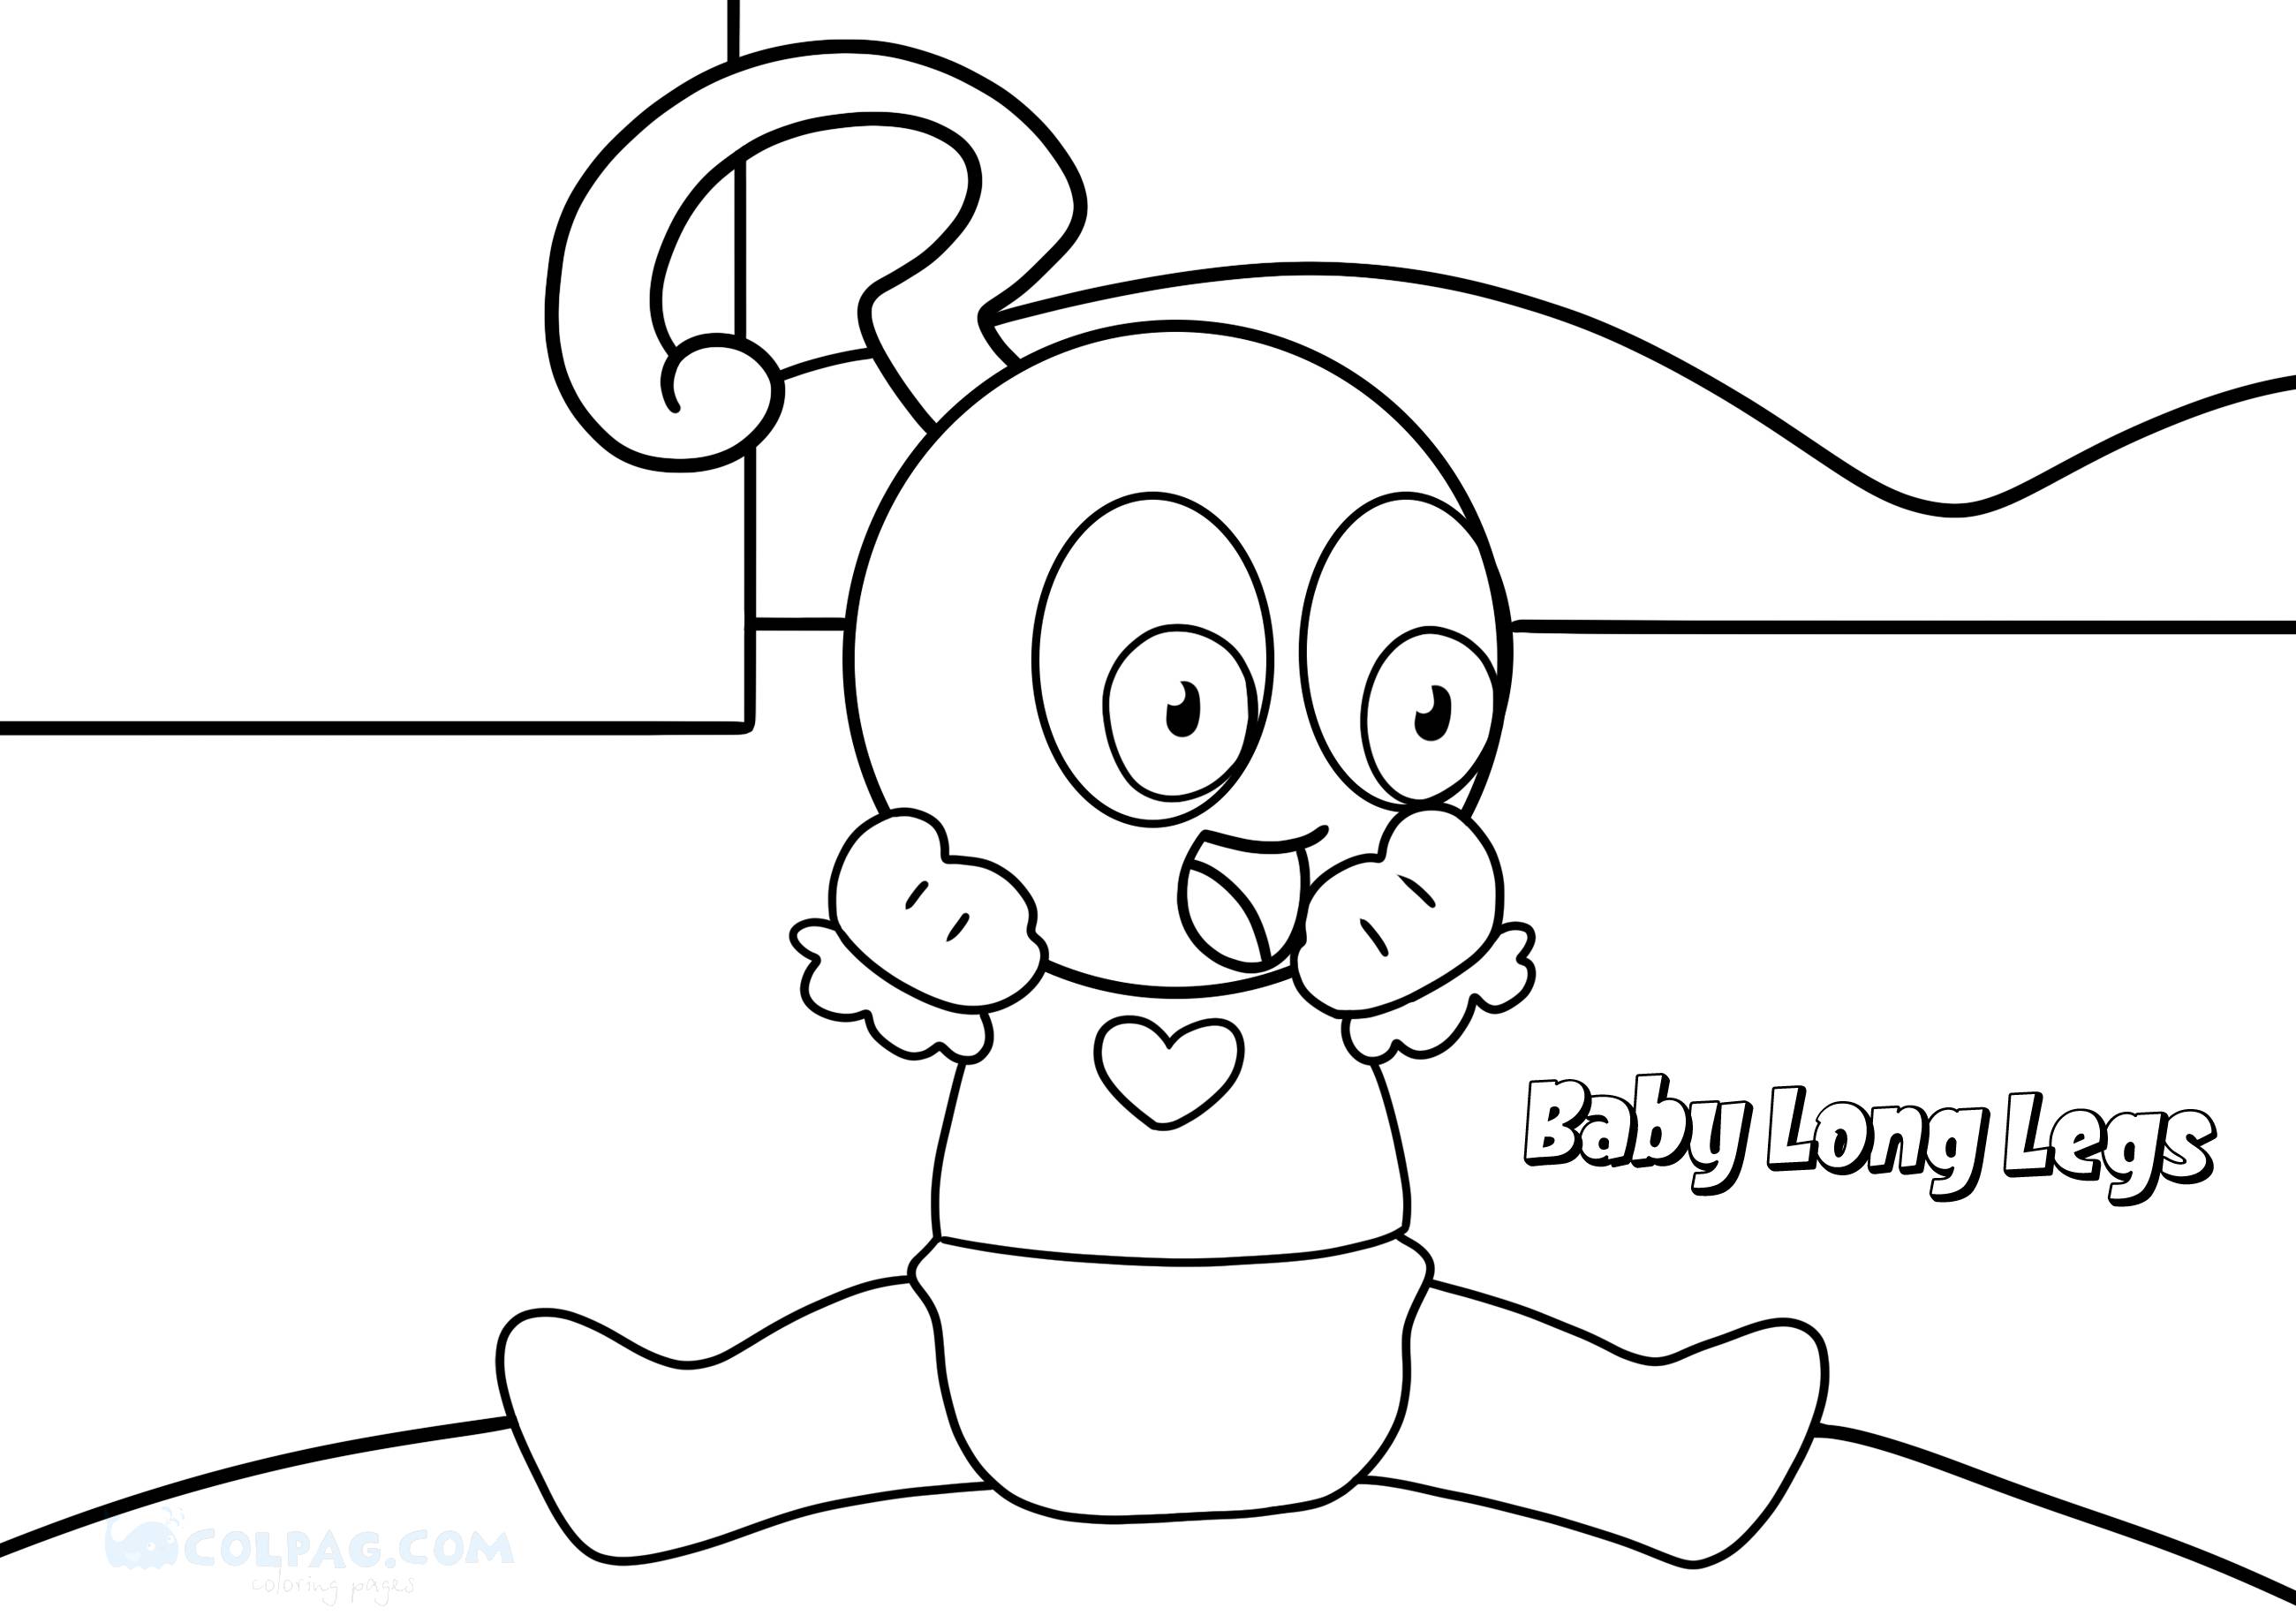 baby-long-legs-coloring-page-colpag-com-11